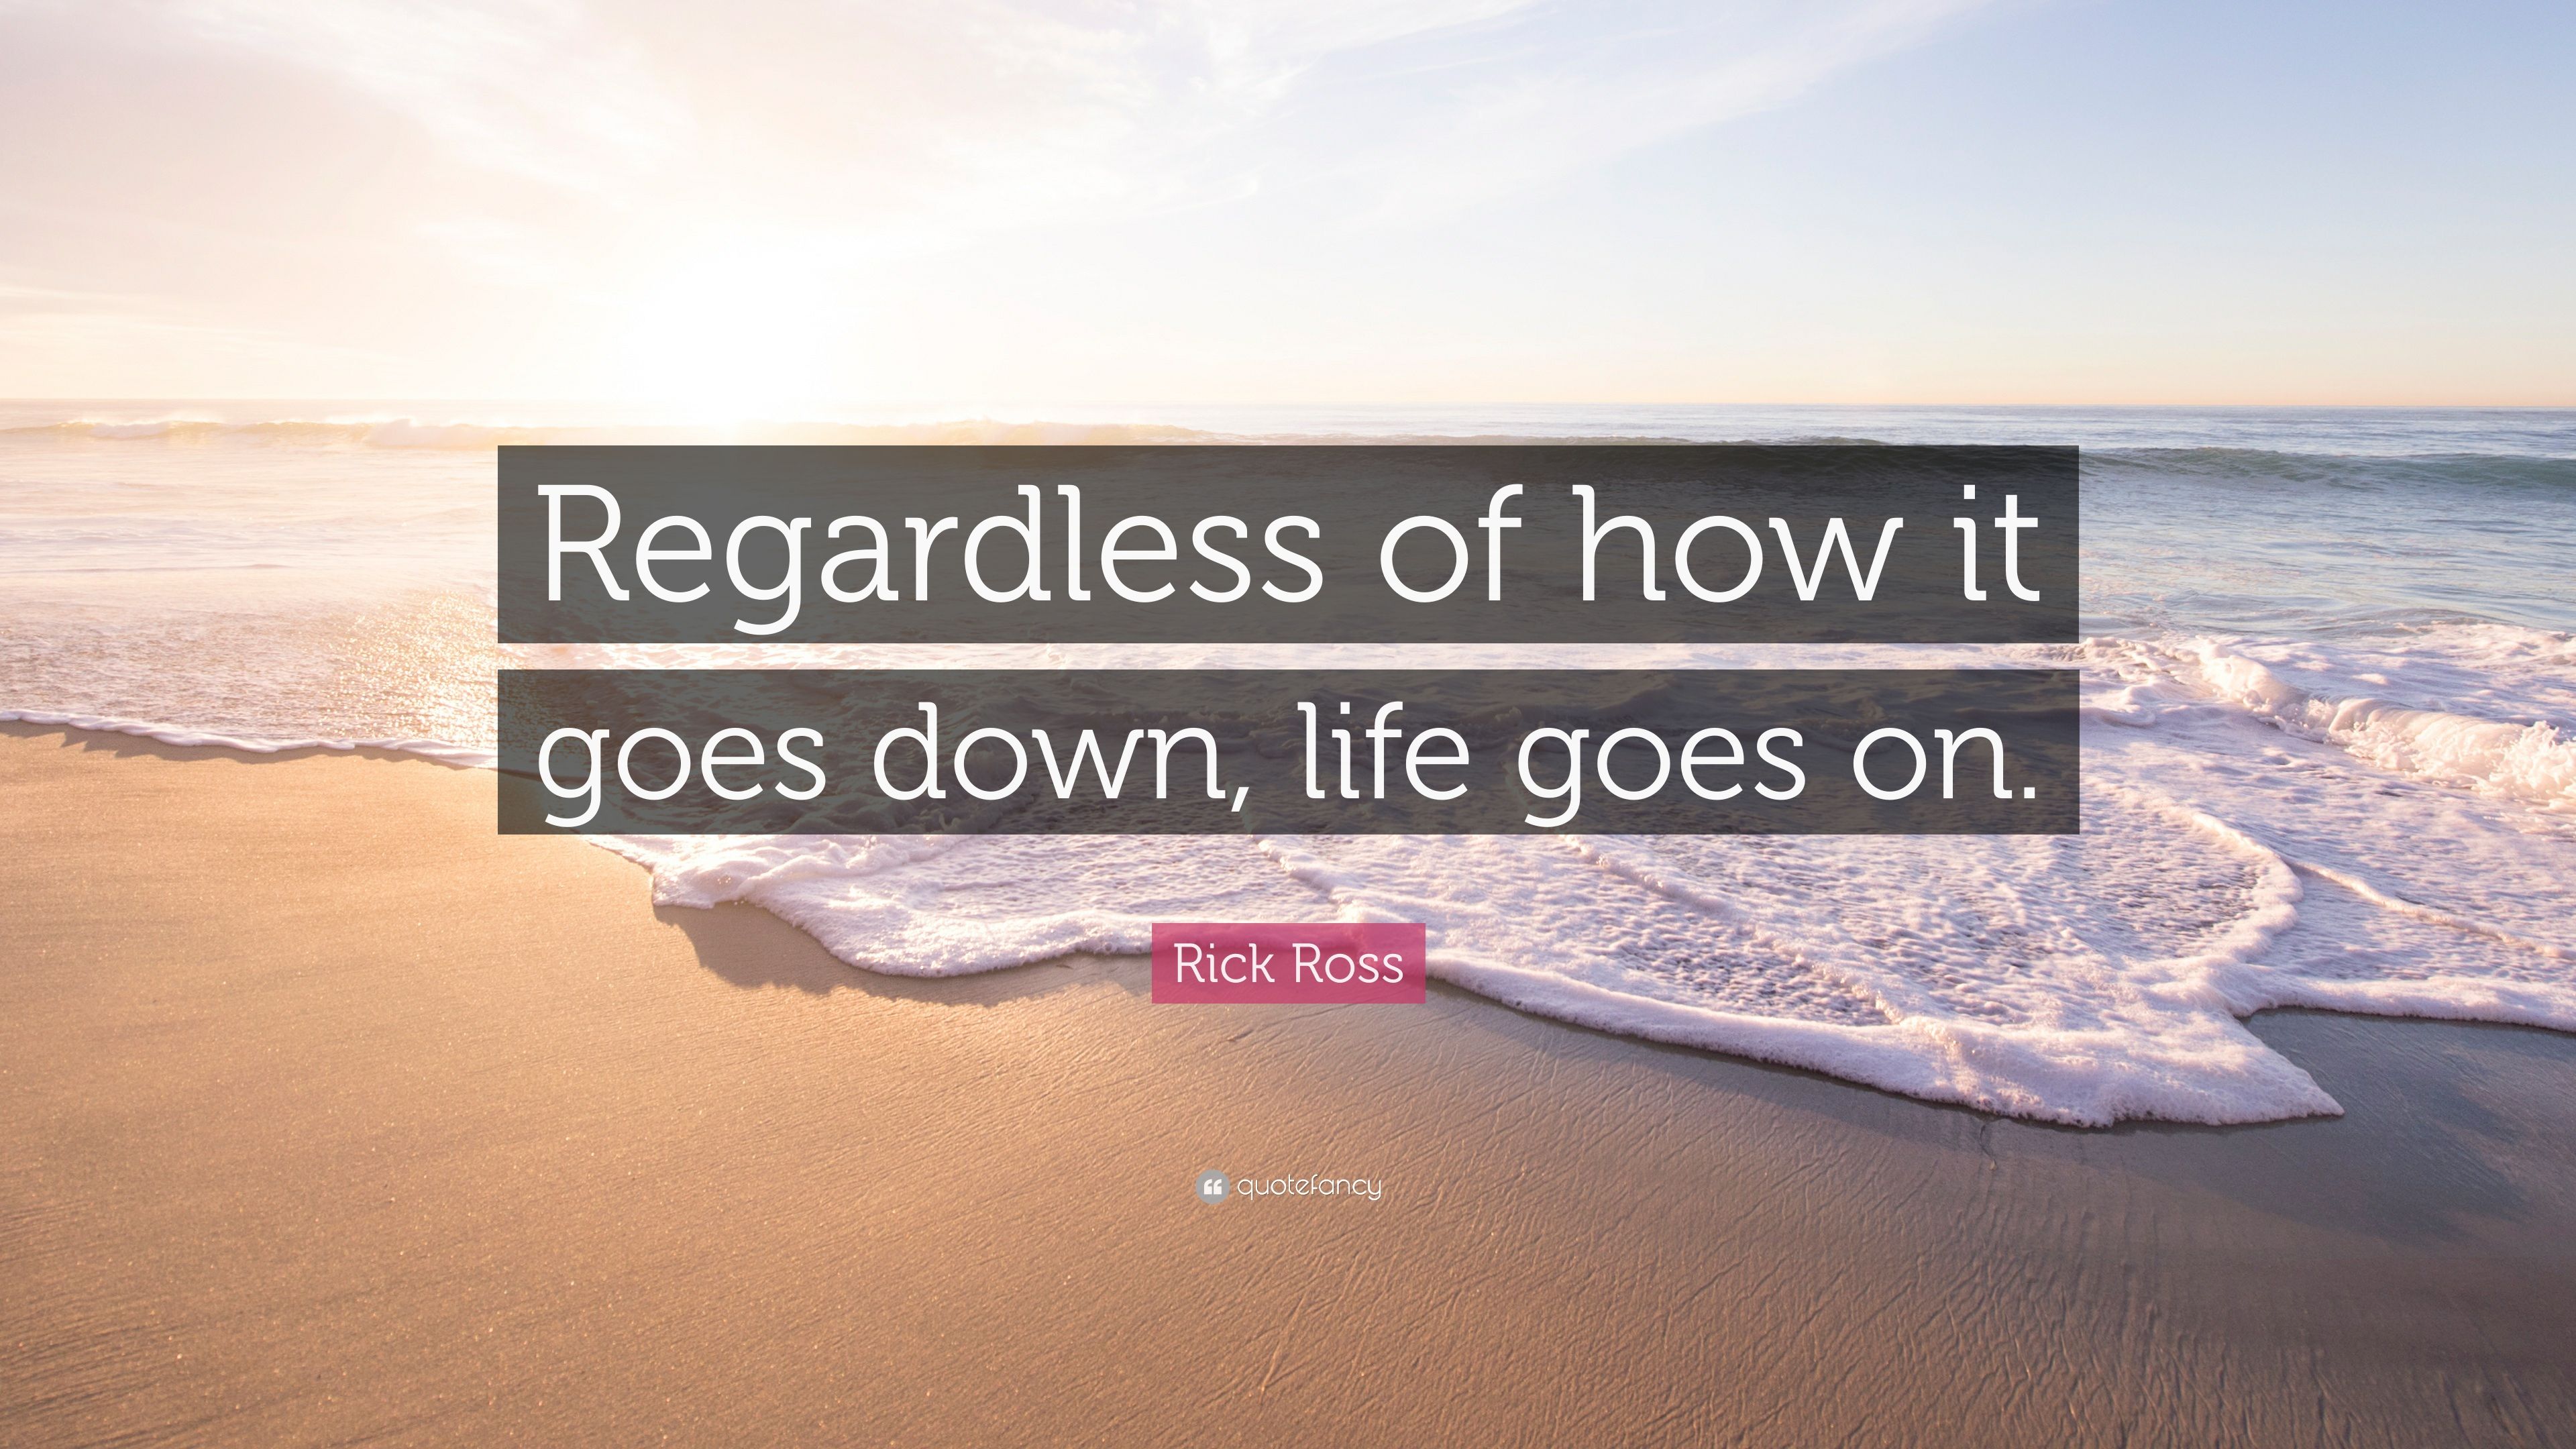 Rick Ross Quote: "Regardless of how it goes down, life goes on.